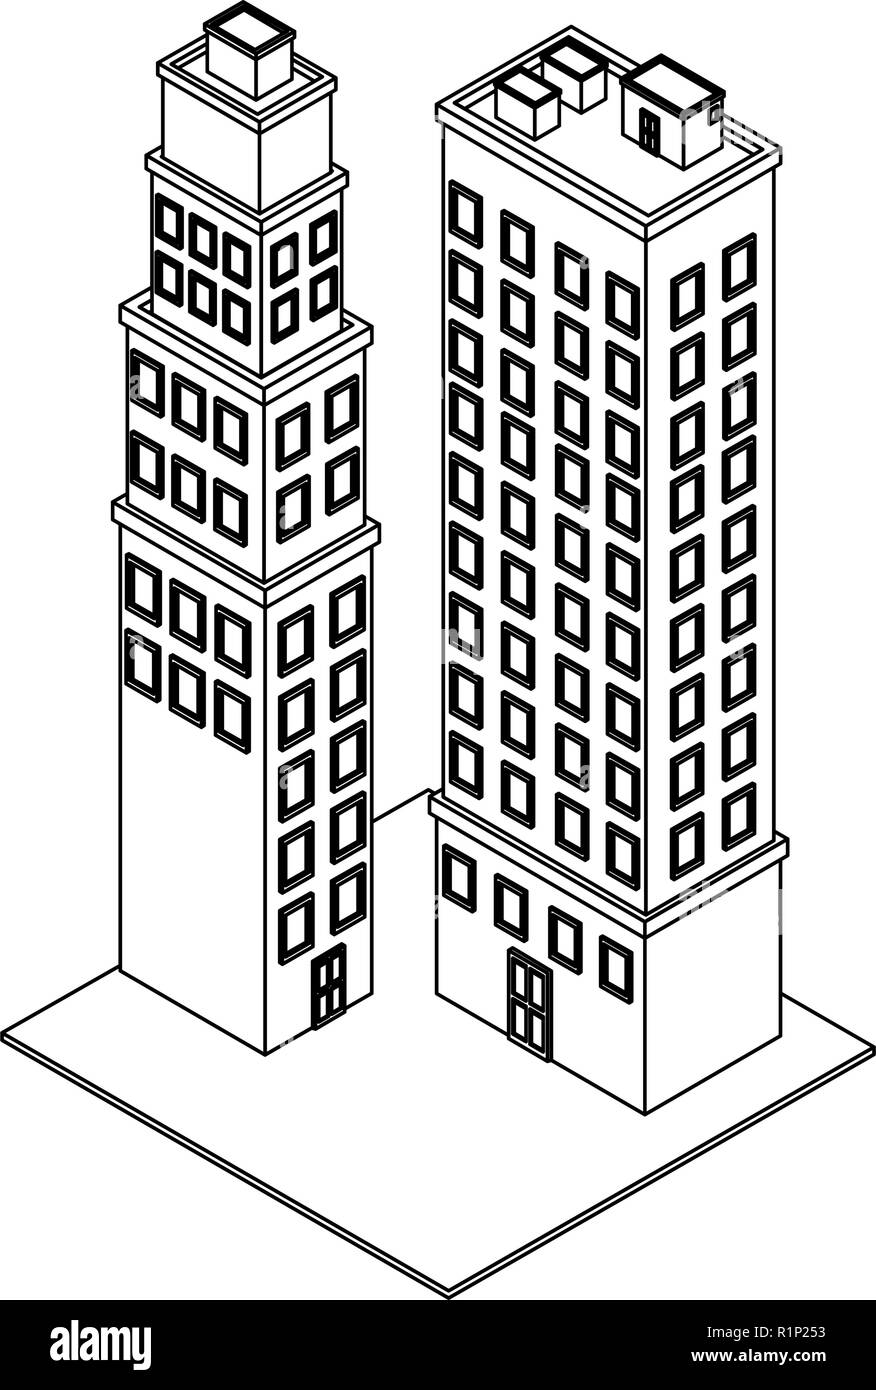 City Skylines White Transparent, Cityscape City Skyline Sketch Building For  Business Background, City, Hand Drawn, Perspective PNG Image For Free  Download